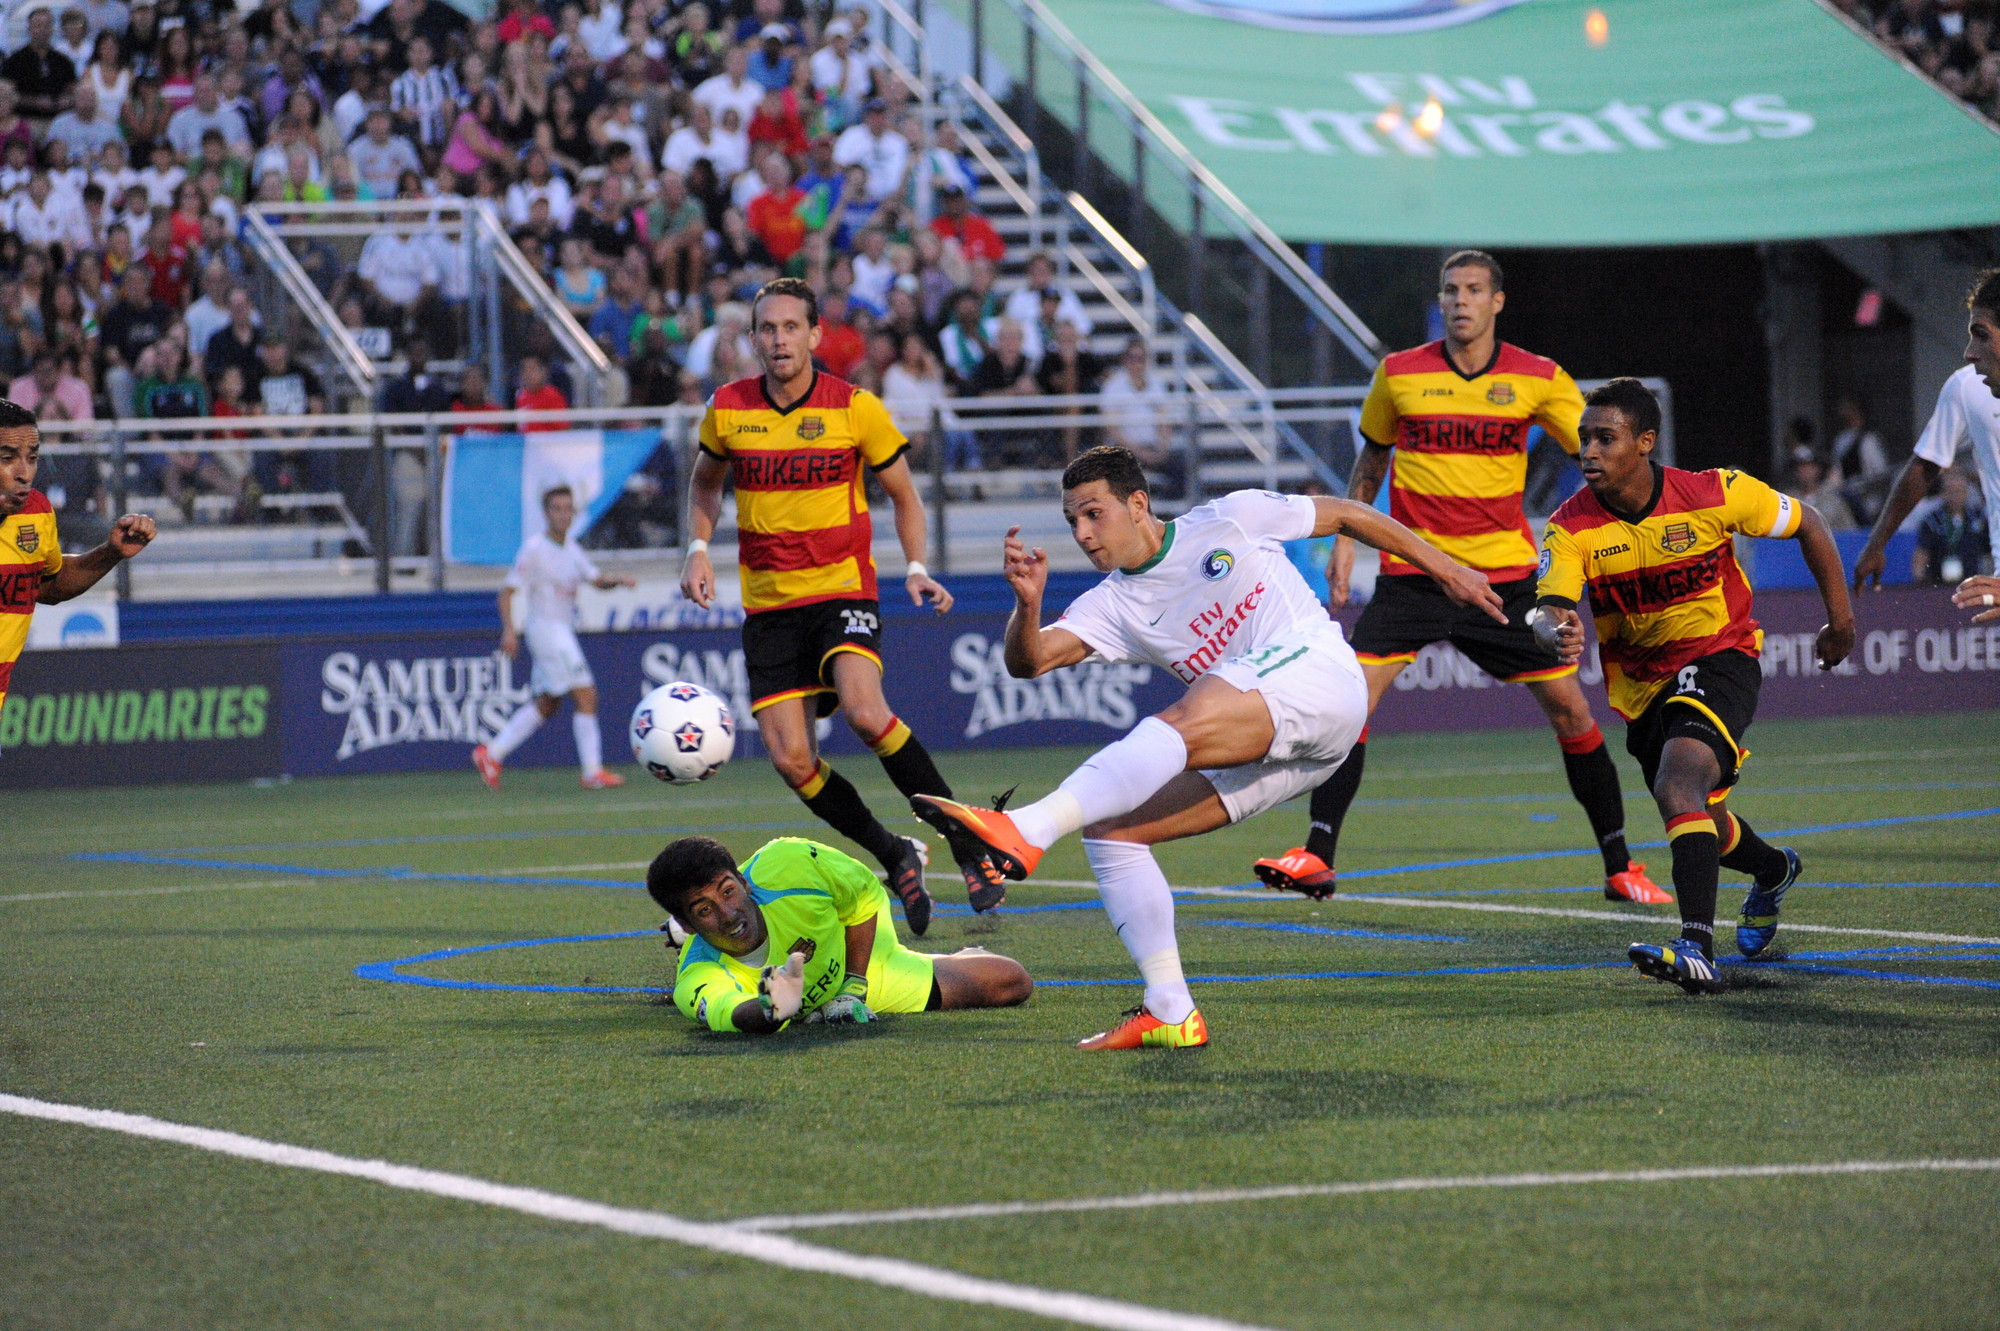 New York Cosmos forward Peri Maroševi scored the match’s first goal in the 44th minute on the way to a 2-1 win over the Fort Lauderdale Strikers on Aug. 3.